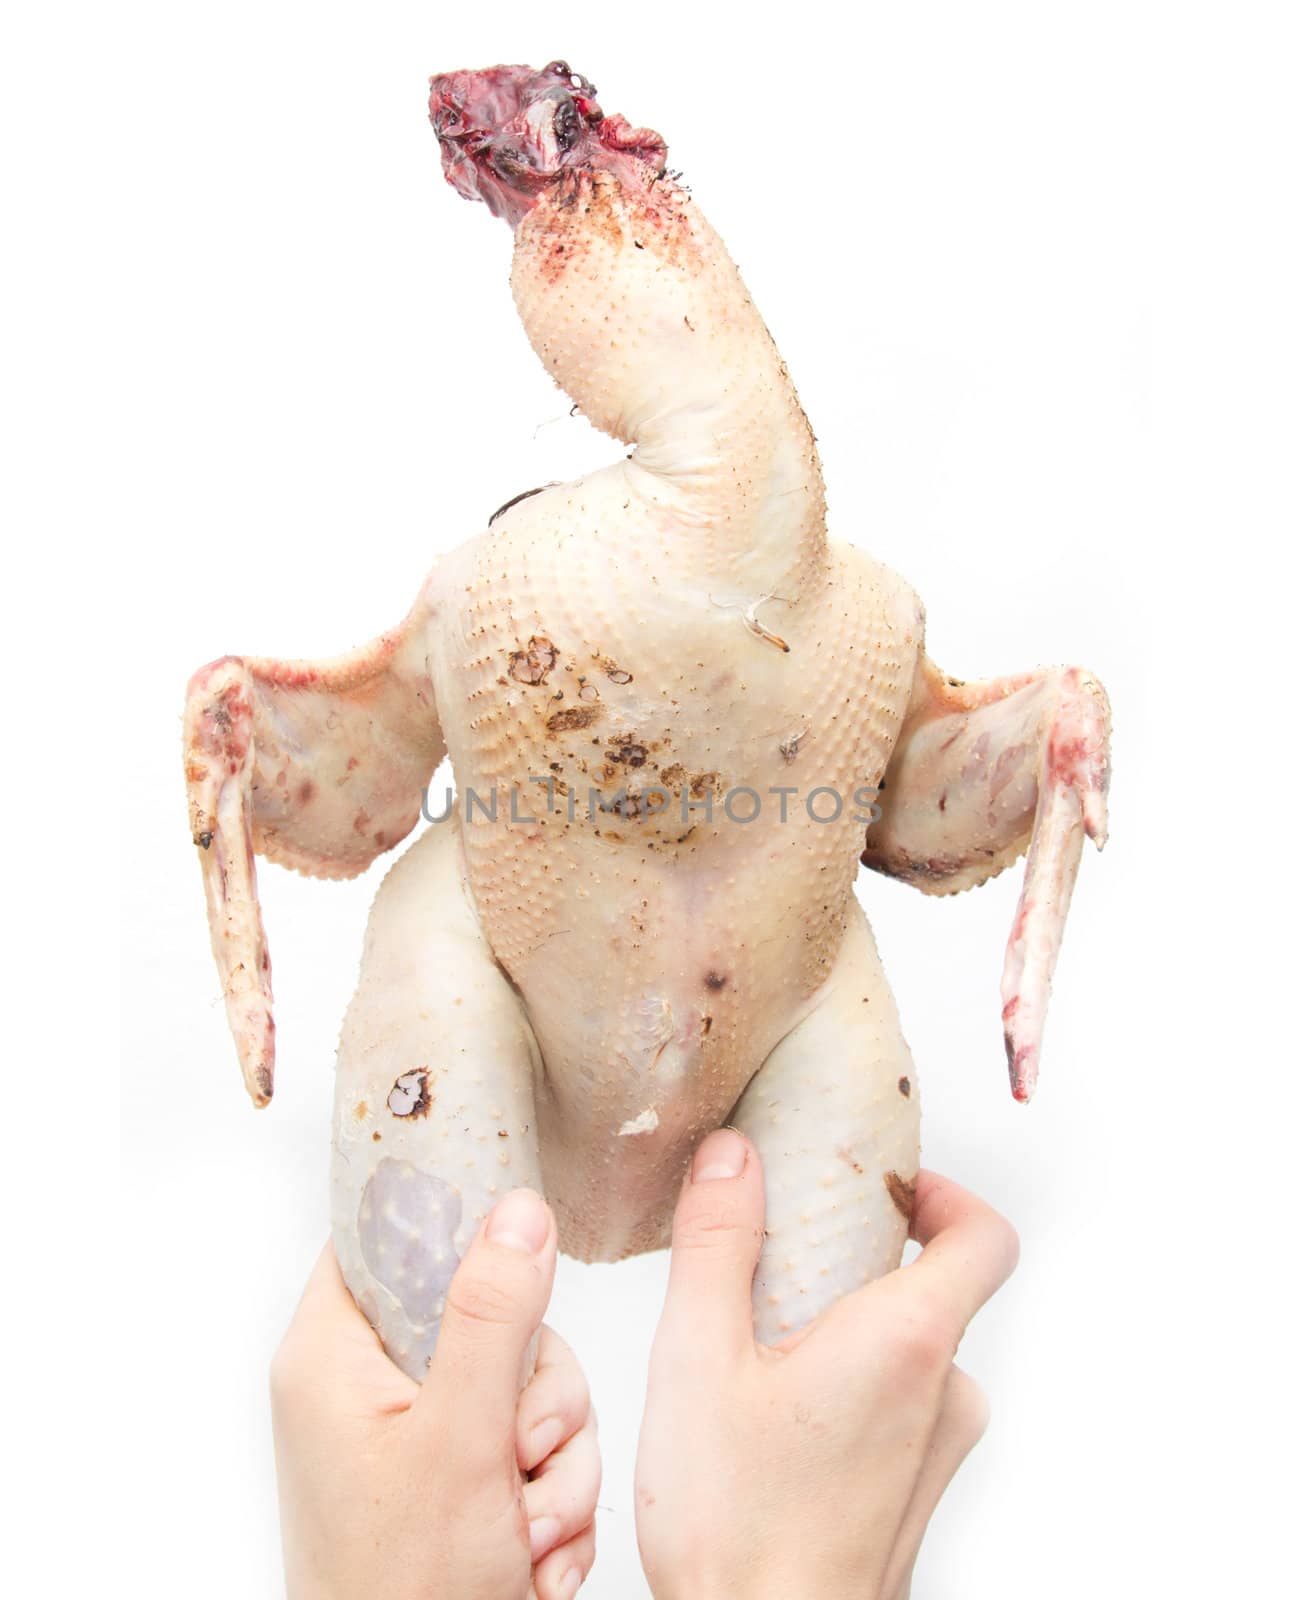 singed the chicken in his hand on a white background by schankz